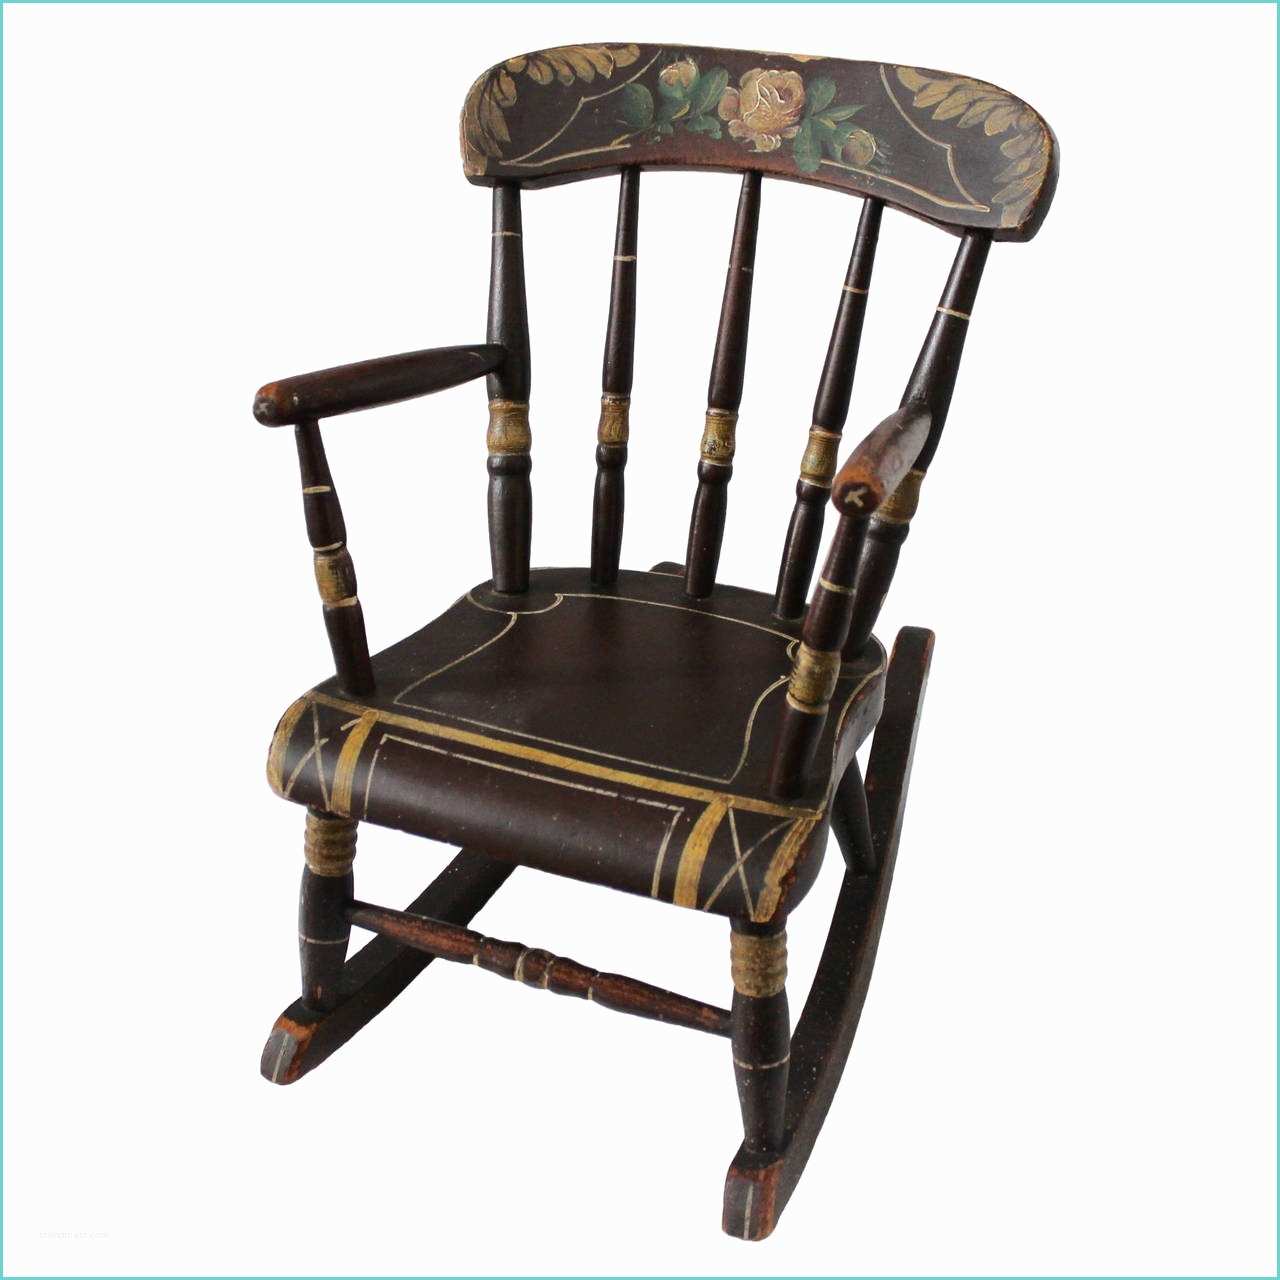 Originals Chairmakers Rocking Chair 19th Century York County Pennsylvania original Painted